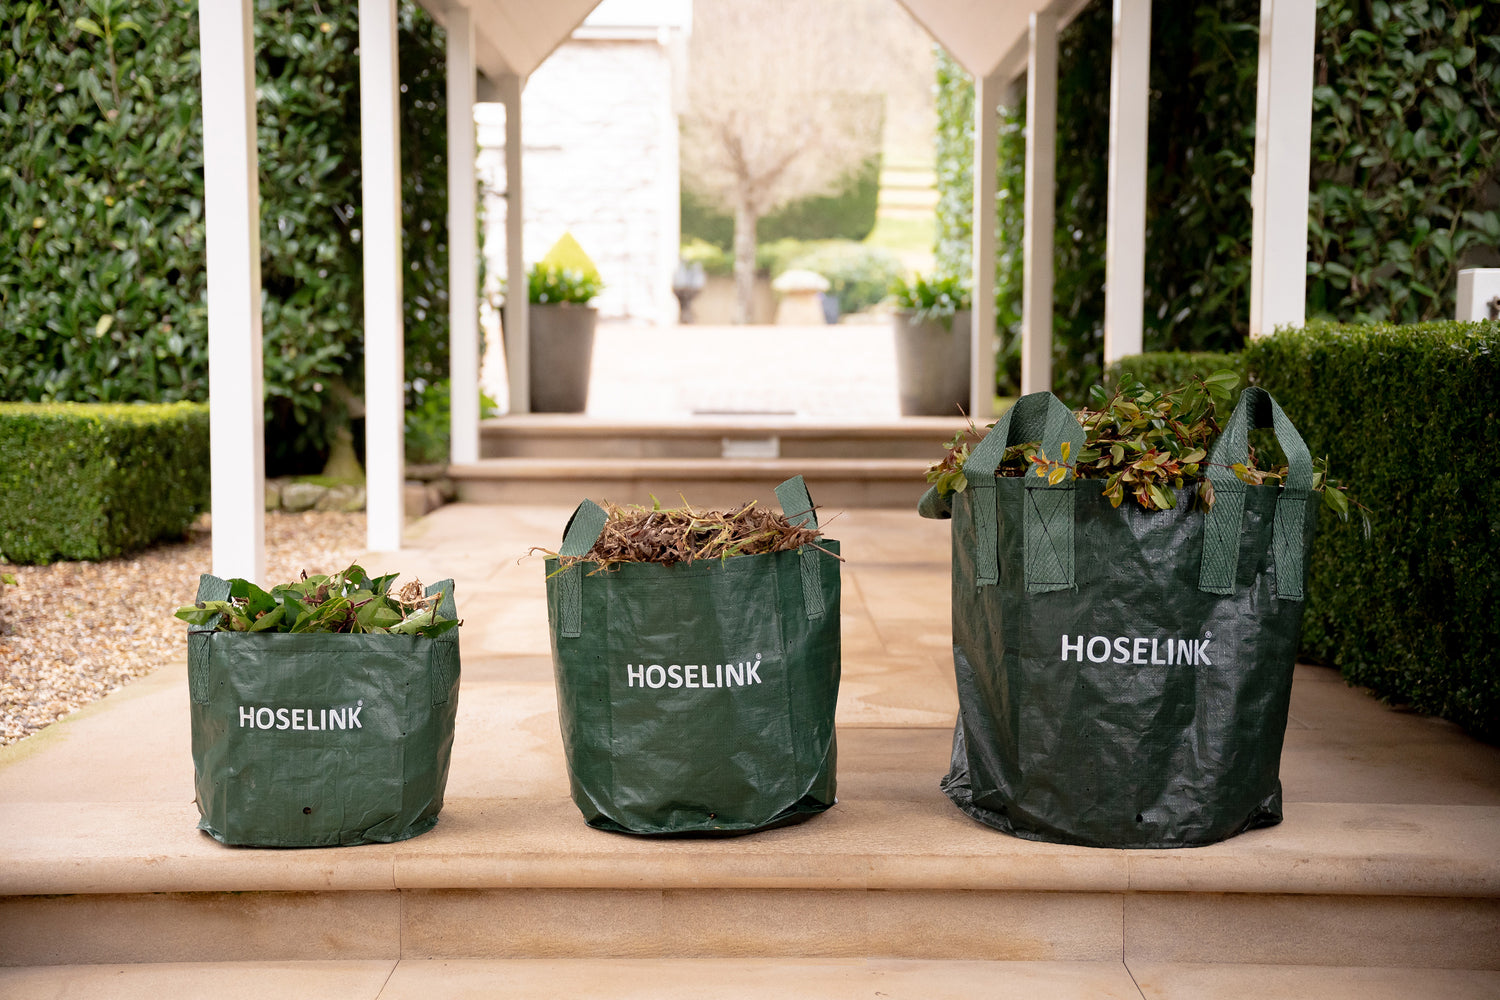 Hoselink's three planter bag sizes side by side on a step all filled with leaf litter and garden debris